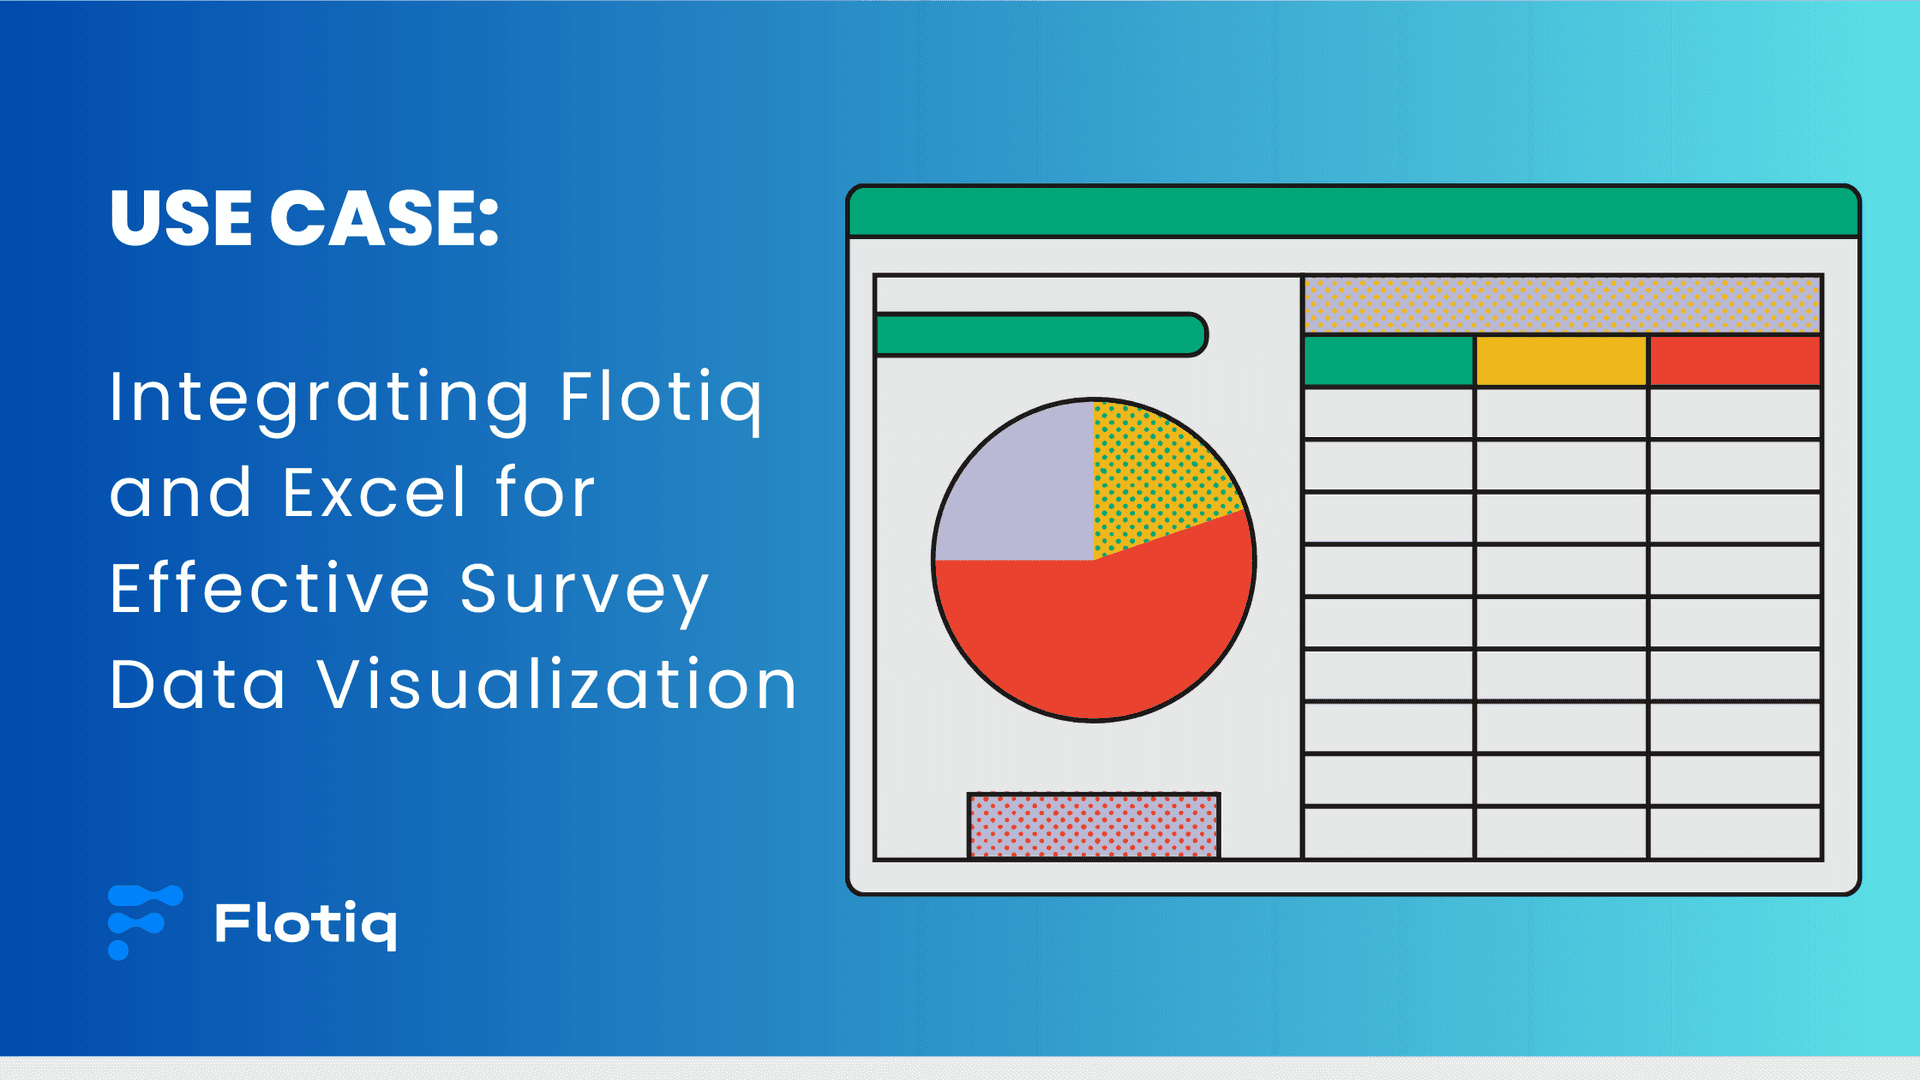 Use Case: Integrating Flotiq and Excel for Effective Survey Data Visualization